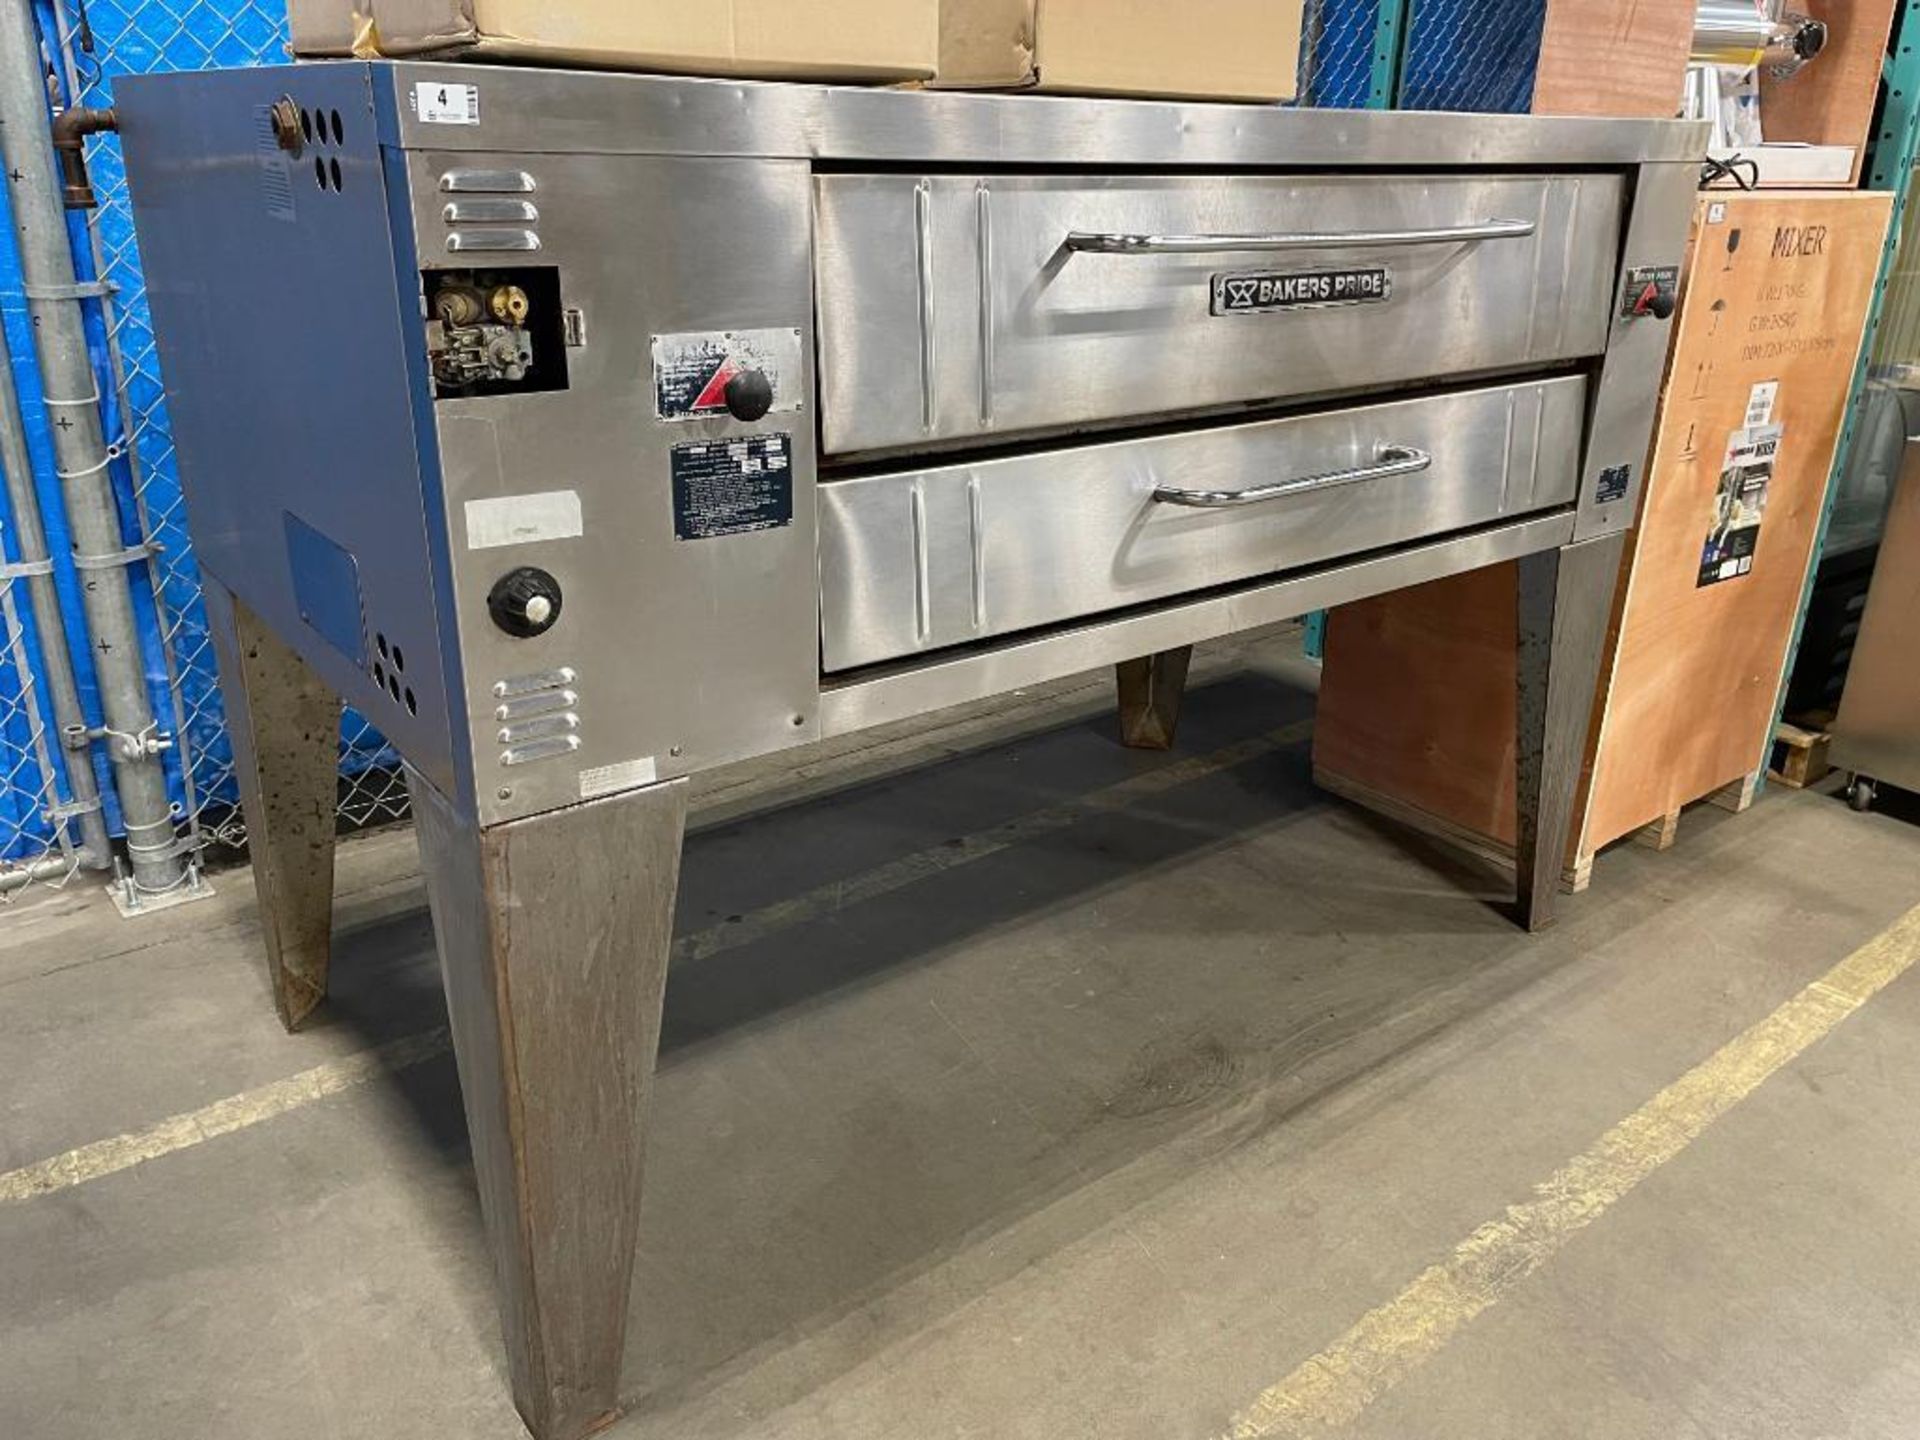 BAKERS PRIDE Y-600 GAS SINGLE DECK PIZZA OVEN - Image 16 of 17